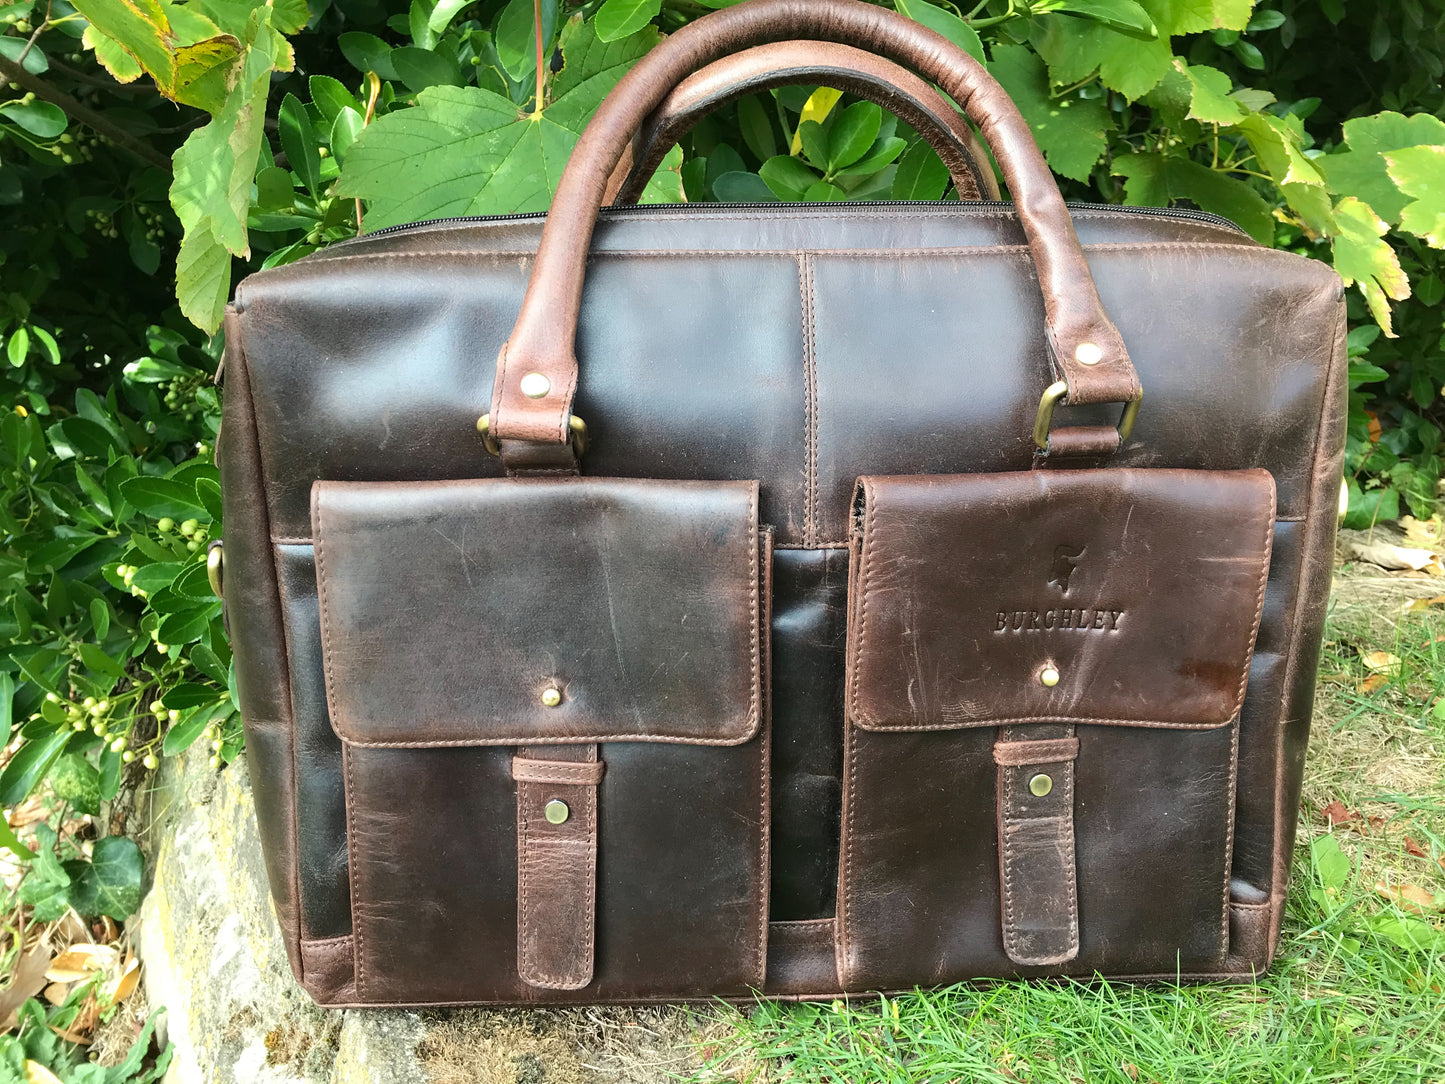 The Ashton. A handmade leather briefcase by Burghley Bags.